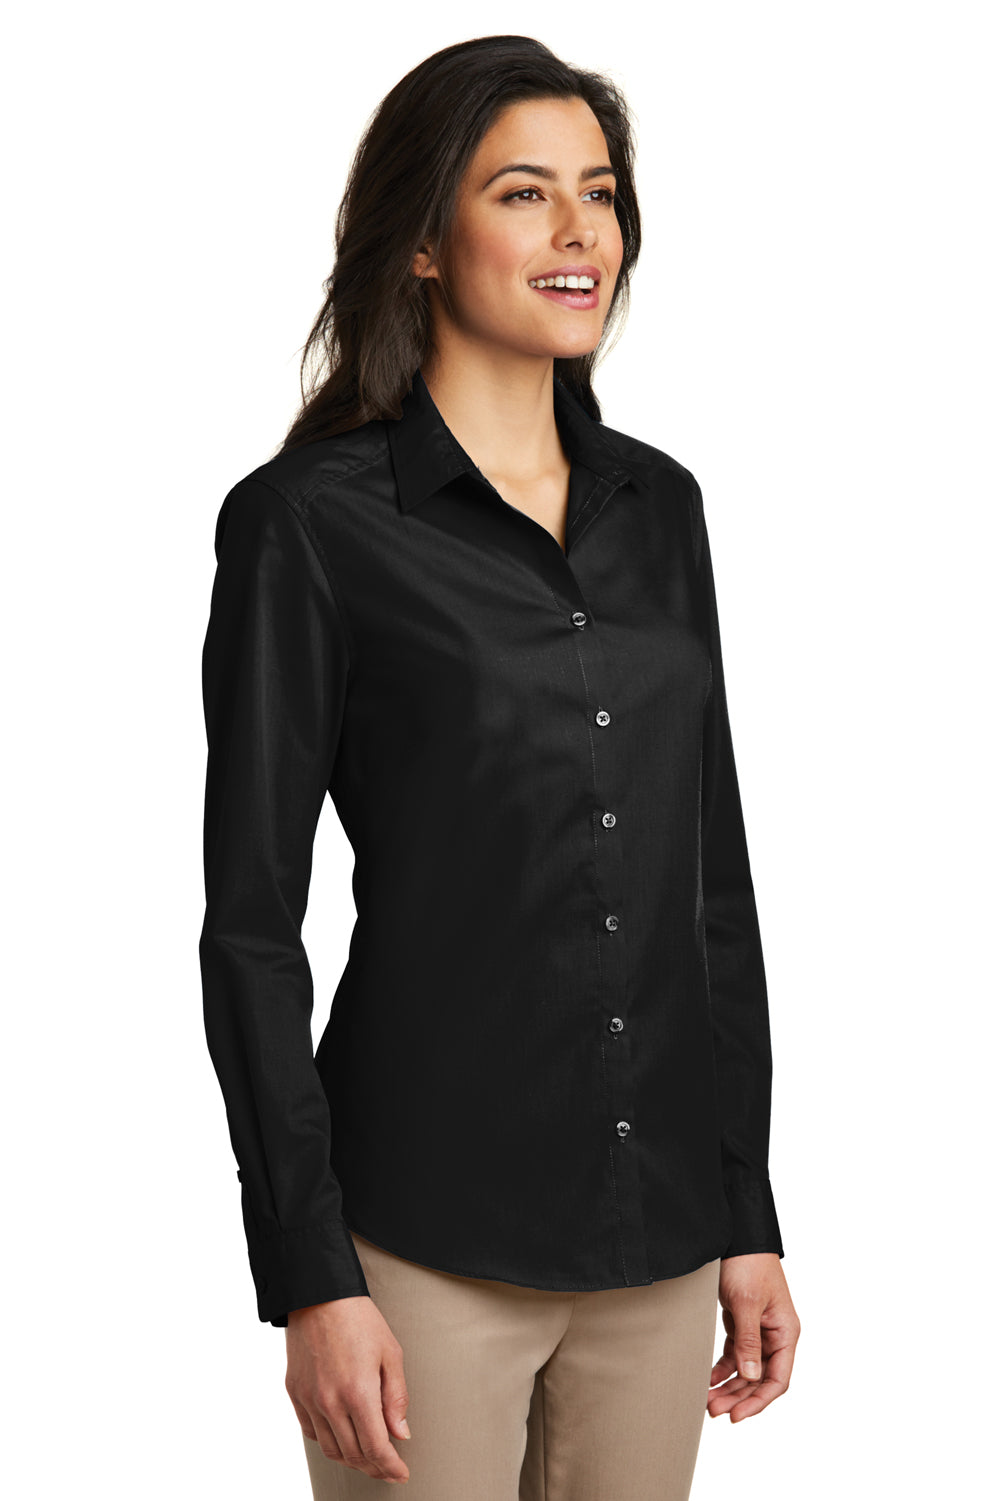 Port Authority LW100 Womens Carefree Stain Resistant Long Sleeve Button Down Shirt Deep Black 3Q